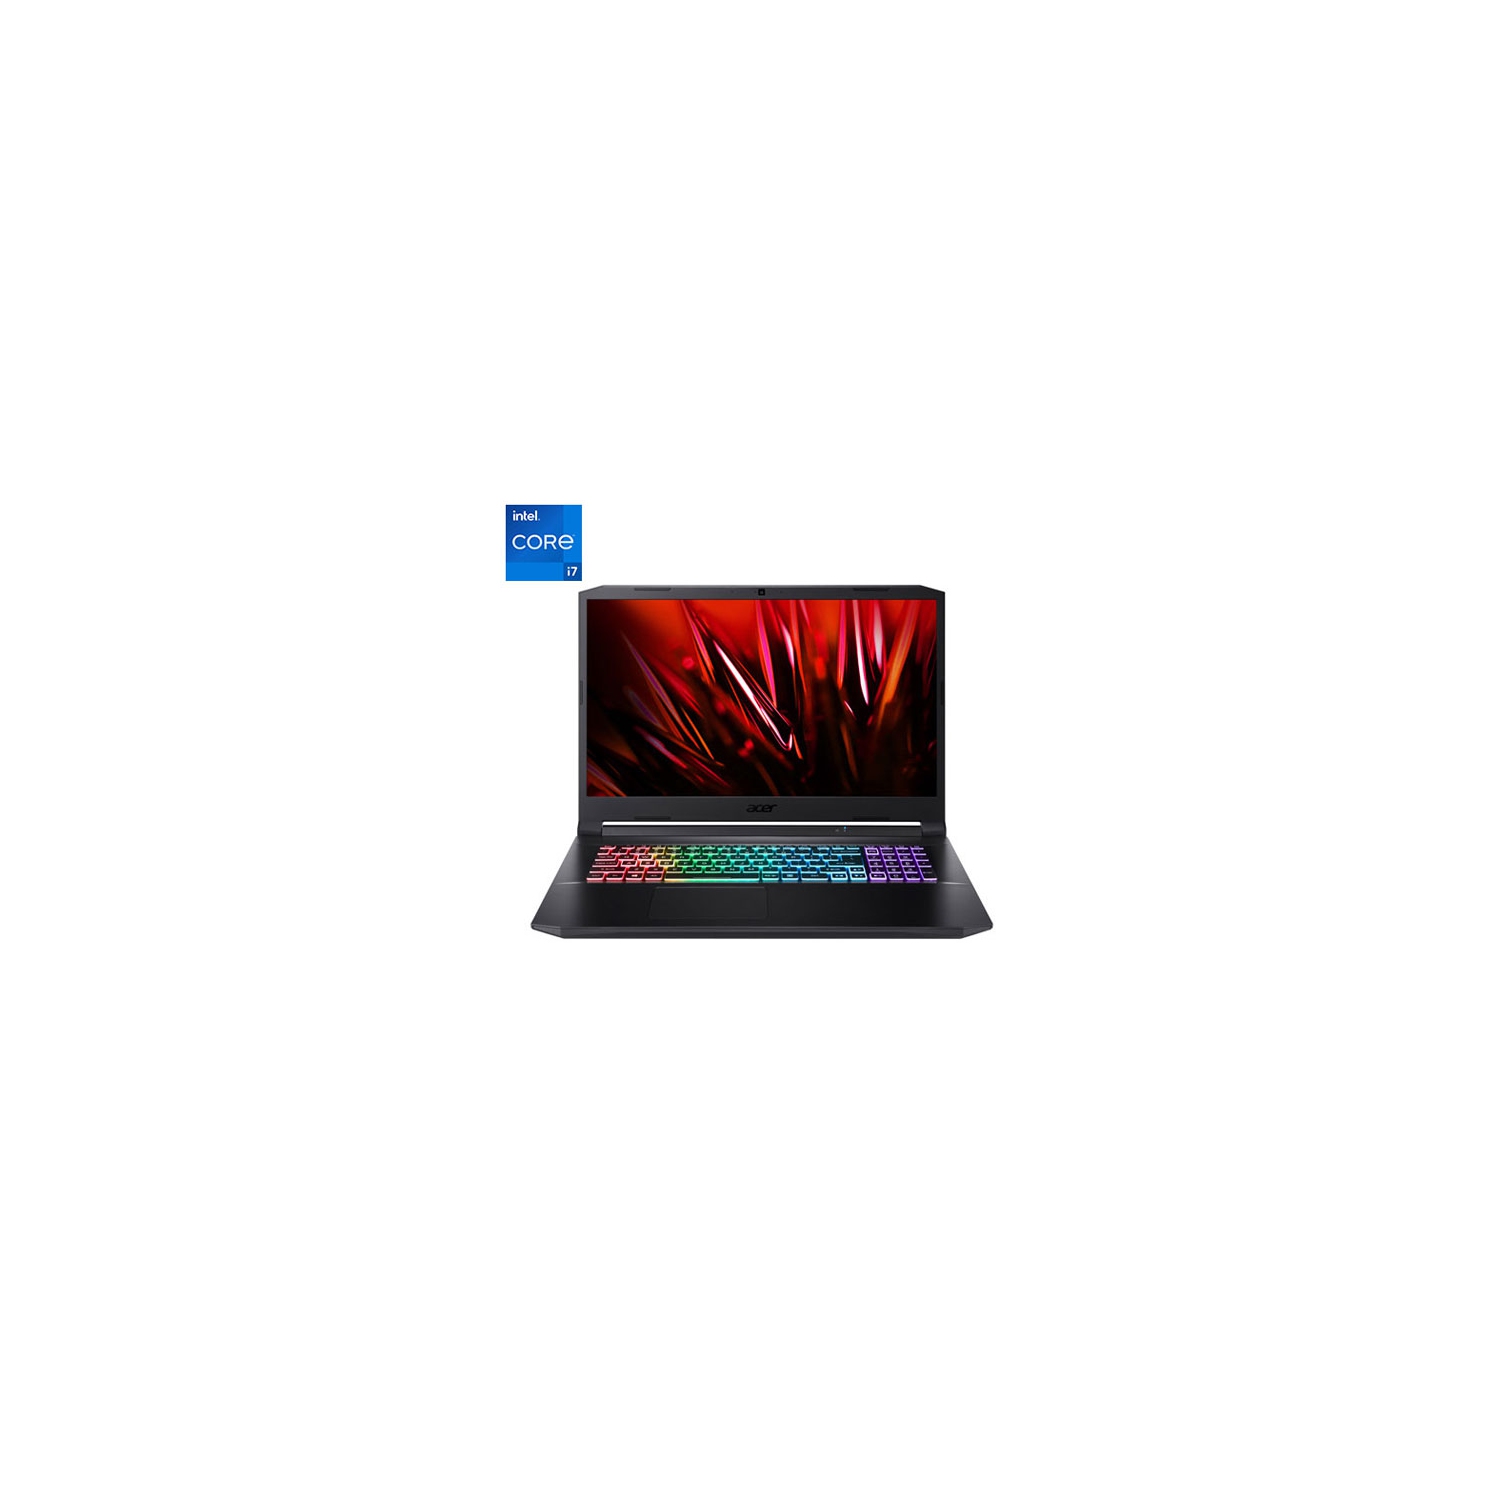 Refurbished (Excellent) - Acer Nitro 5 17.3" Gaming Laptop -Black (Intel Core i7-11800H/1TB SSD/16GB RAM/RTX 3070/Win 11)